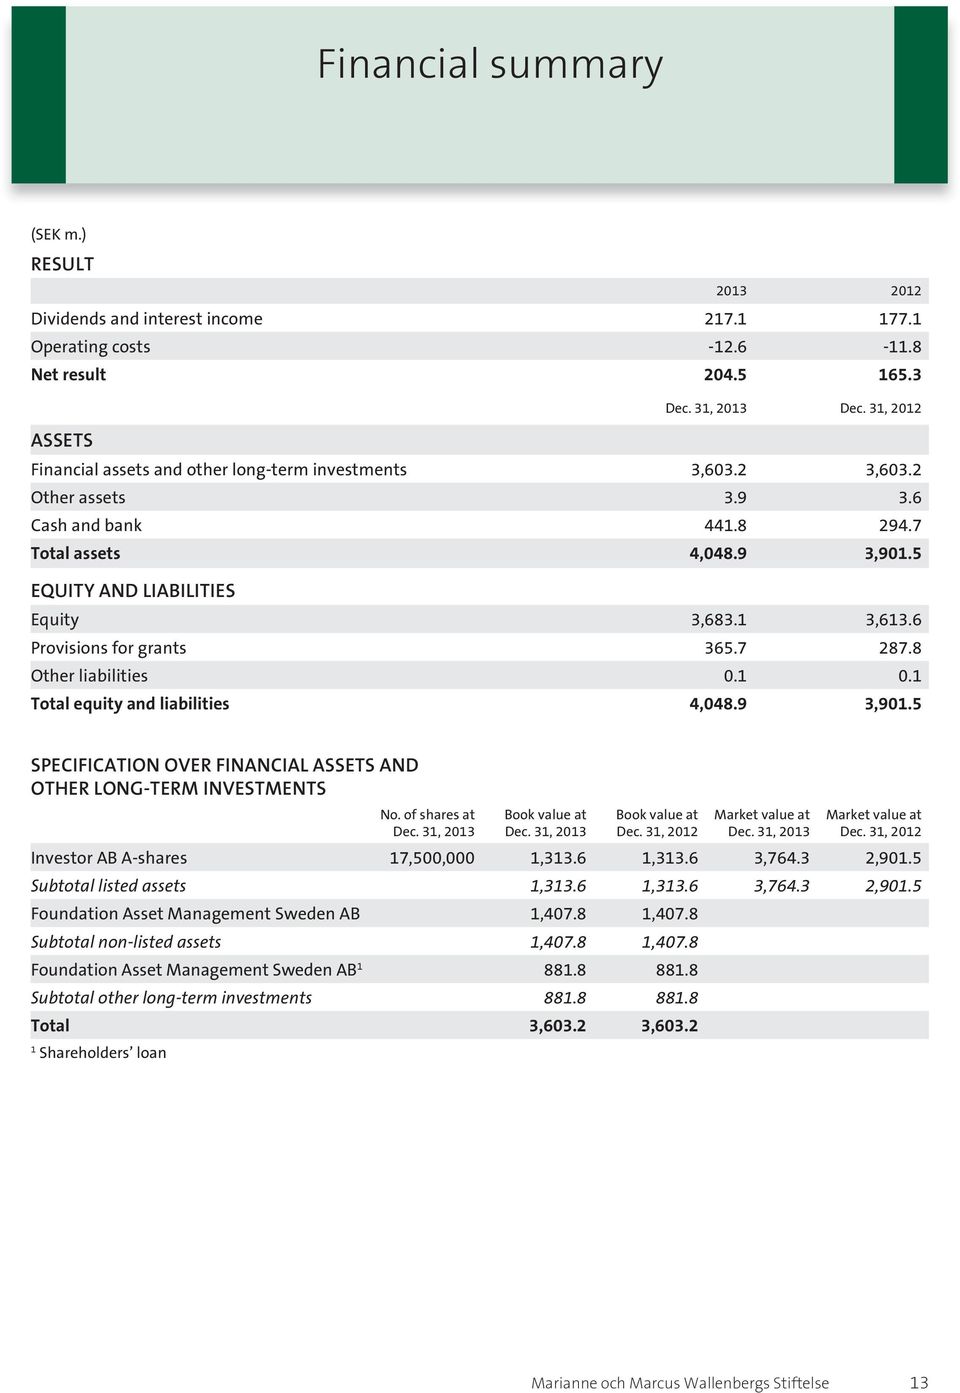 1 3,613.6 Provisions for grants 365.7 287.8 Other liabilities 0.1 0.1 Total equity and liabilities 4,048.9 3,901.5 SPECIFICATION OVER FINANCIAL ASSETS AND OTHER LONG-TERM INVESTMENTS No.